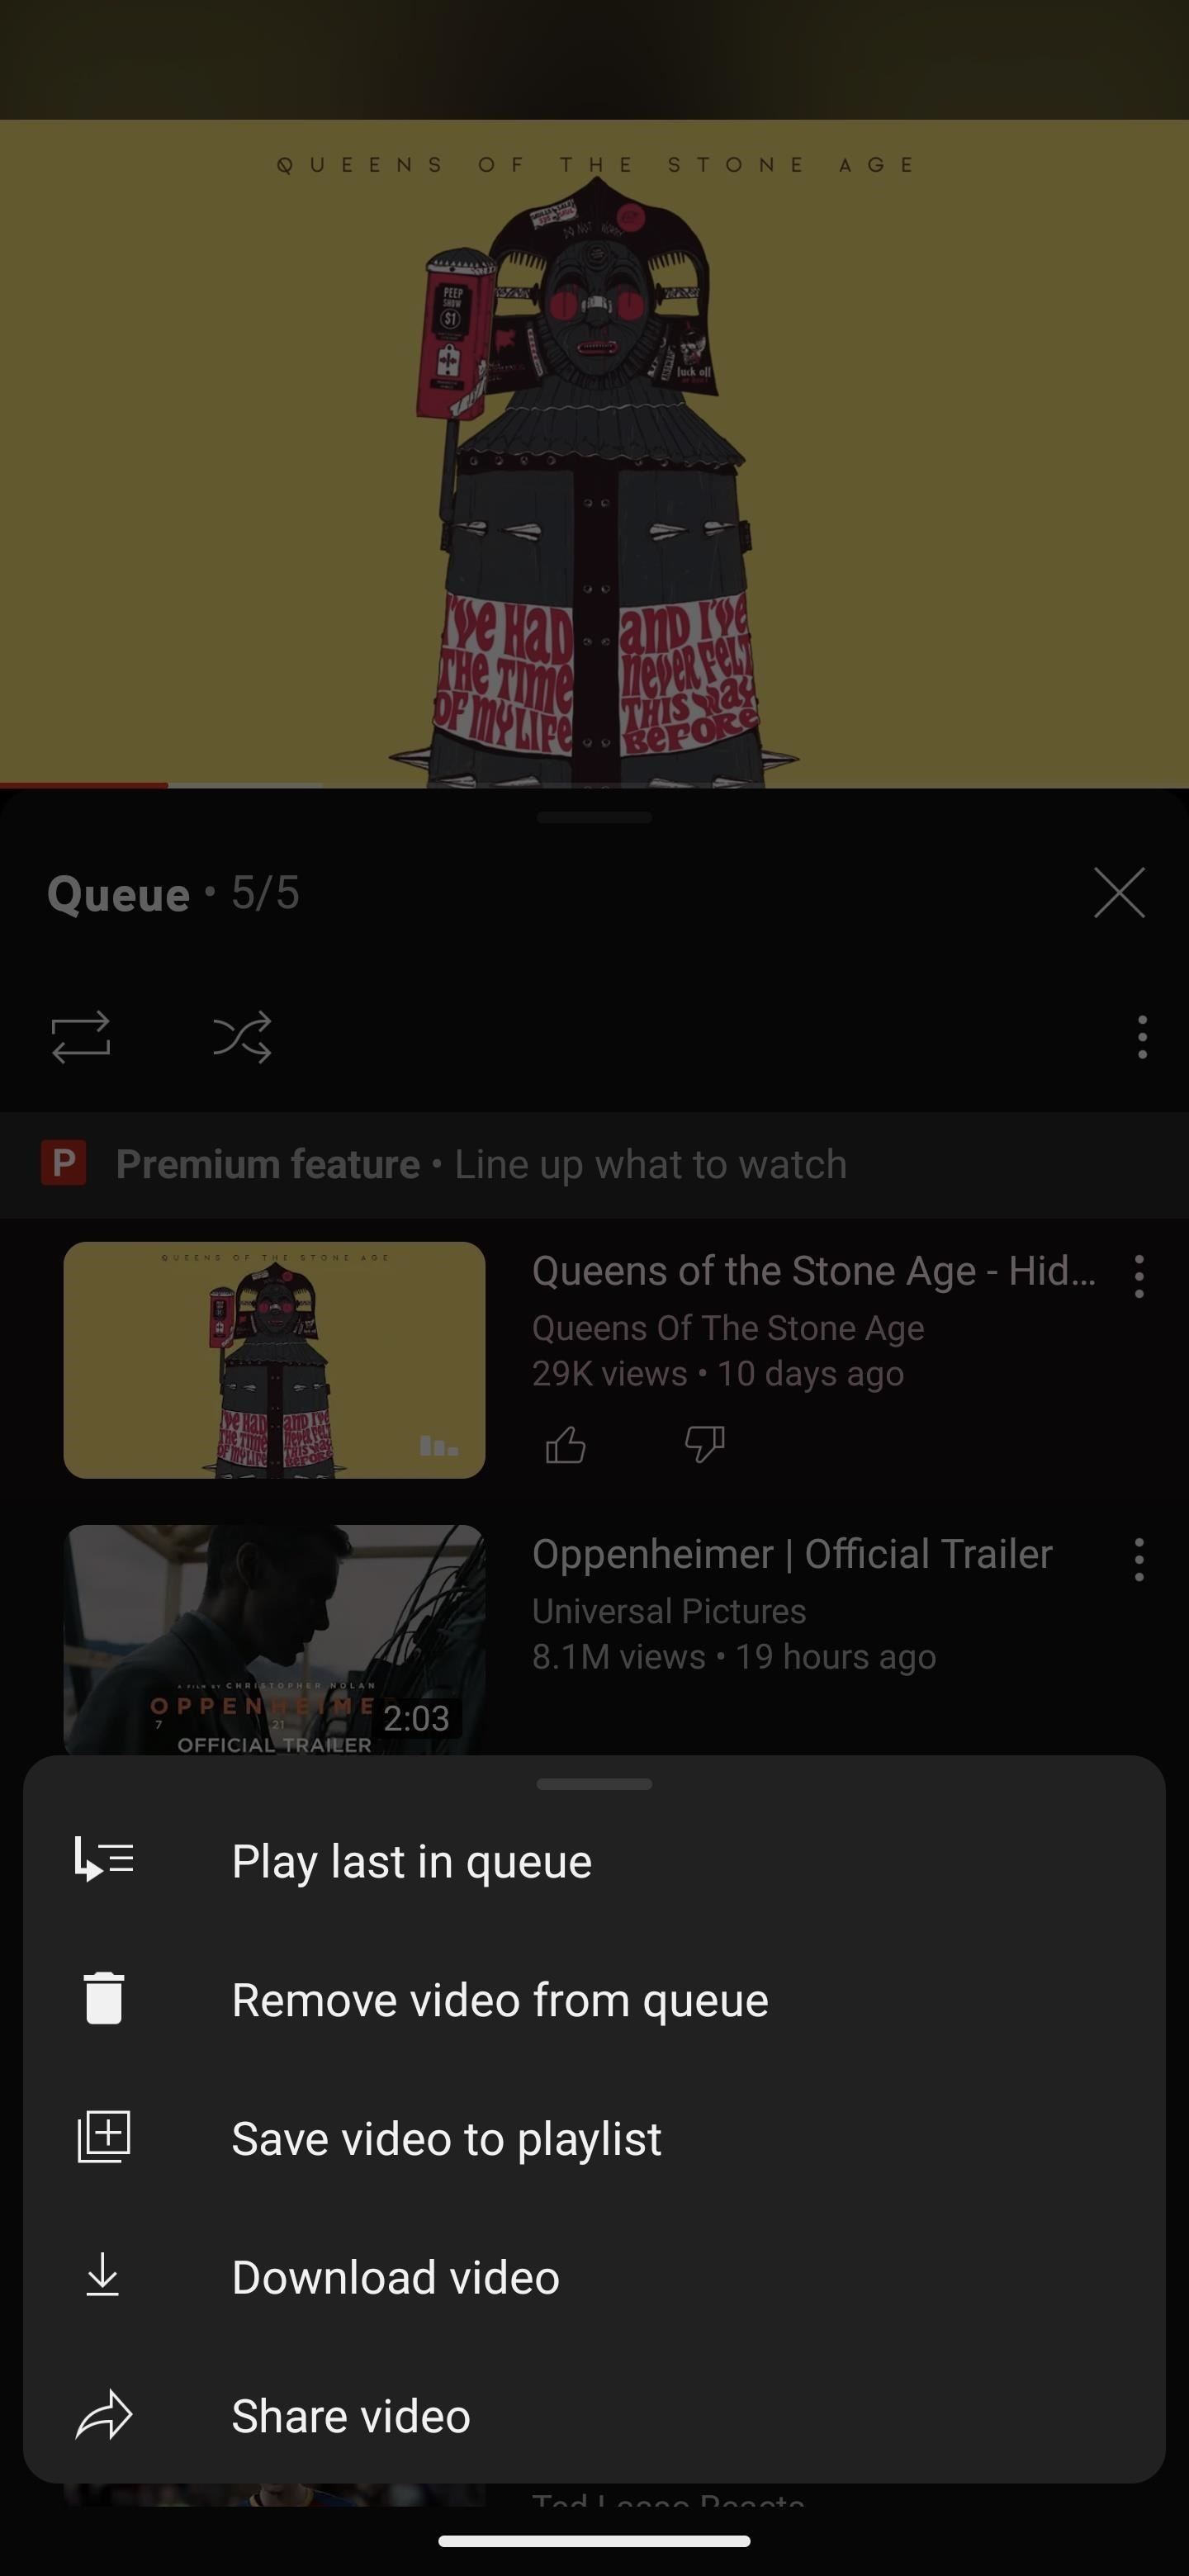 How to queue up new YouTube videos on your mobile device